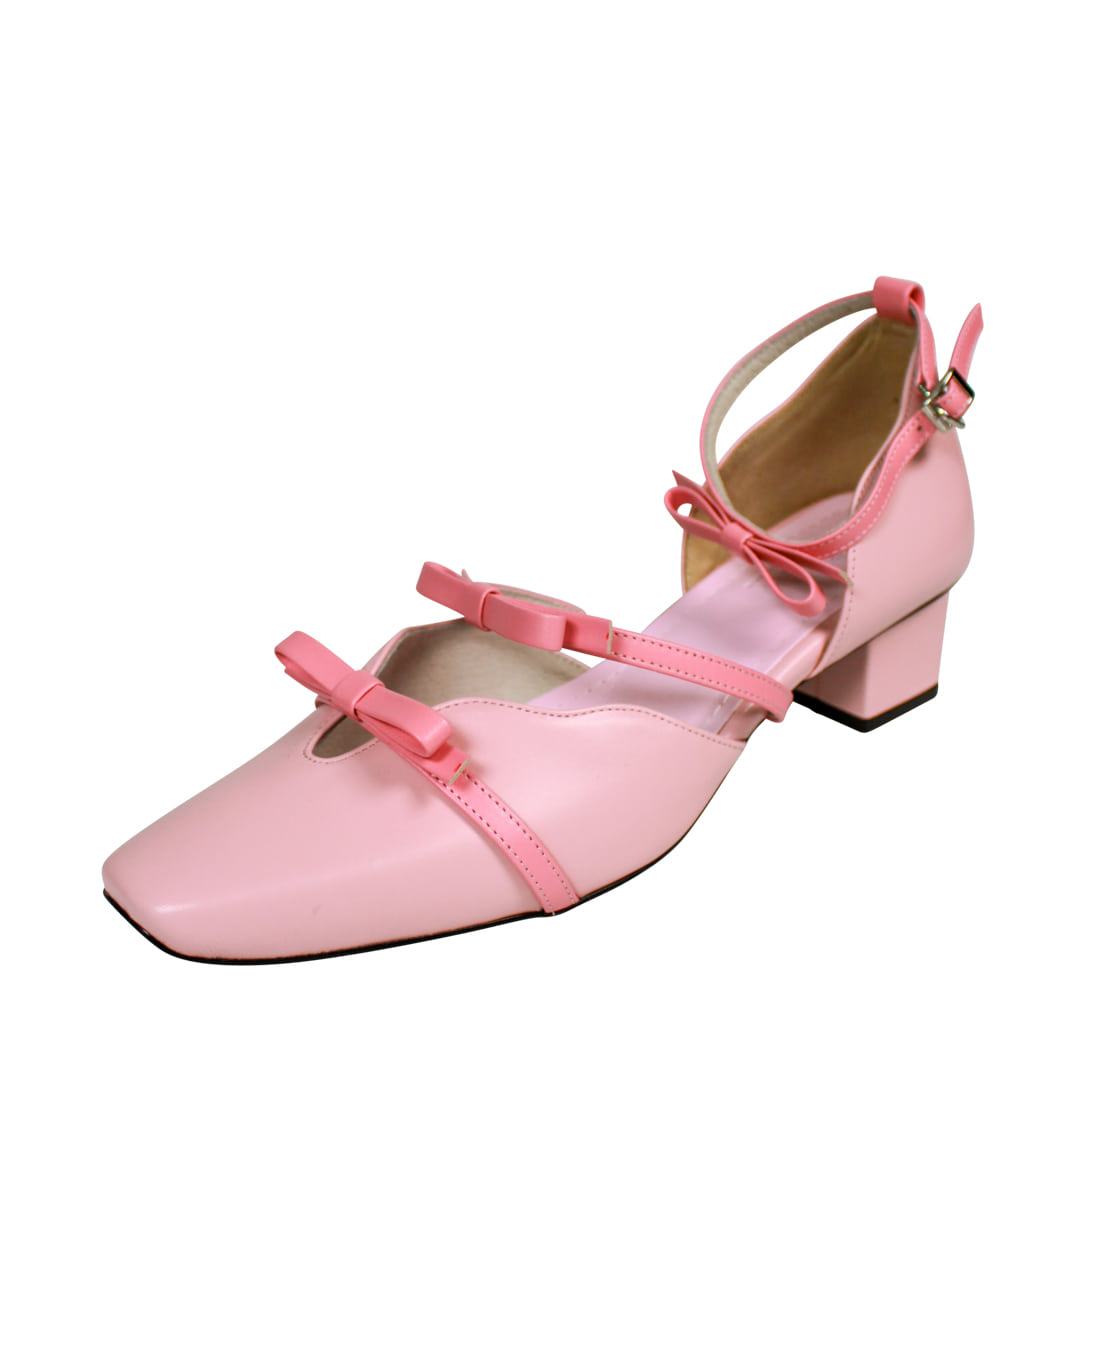 3 Strap Love-tie Shoes (Pink)